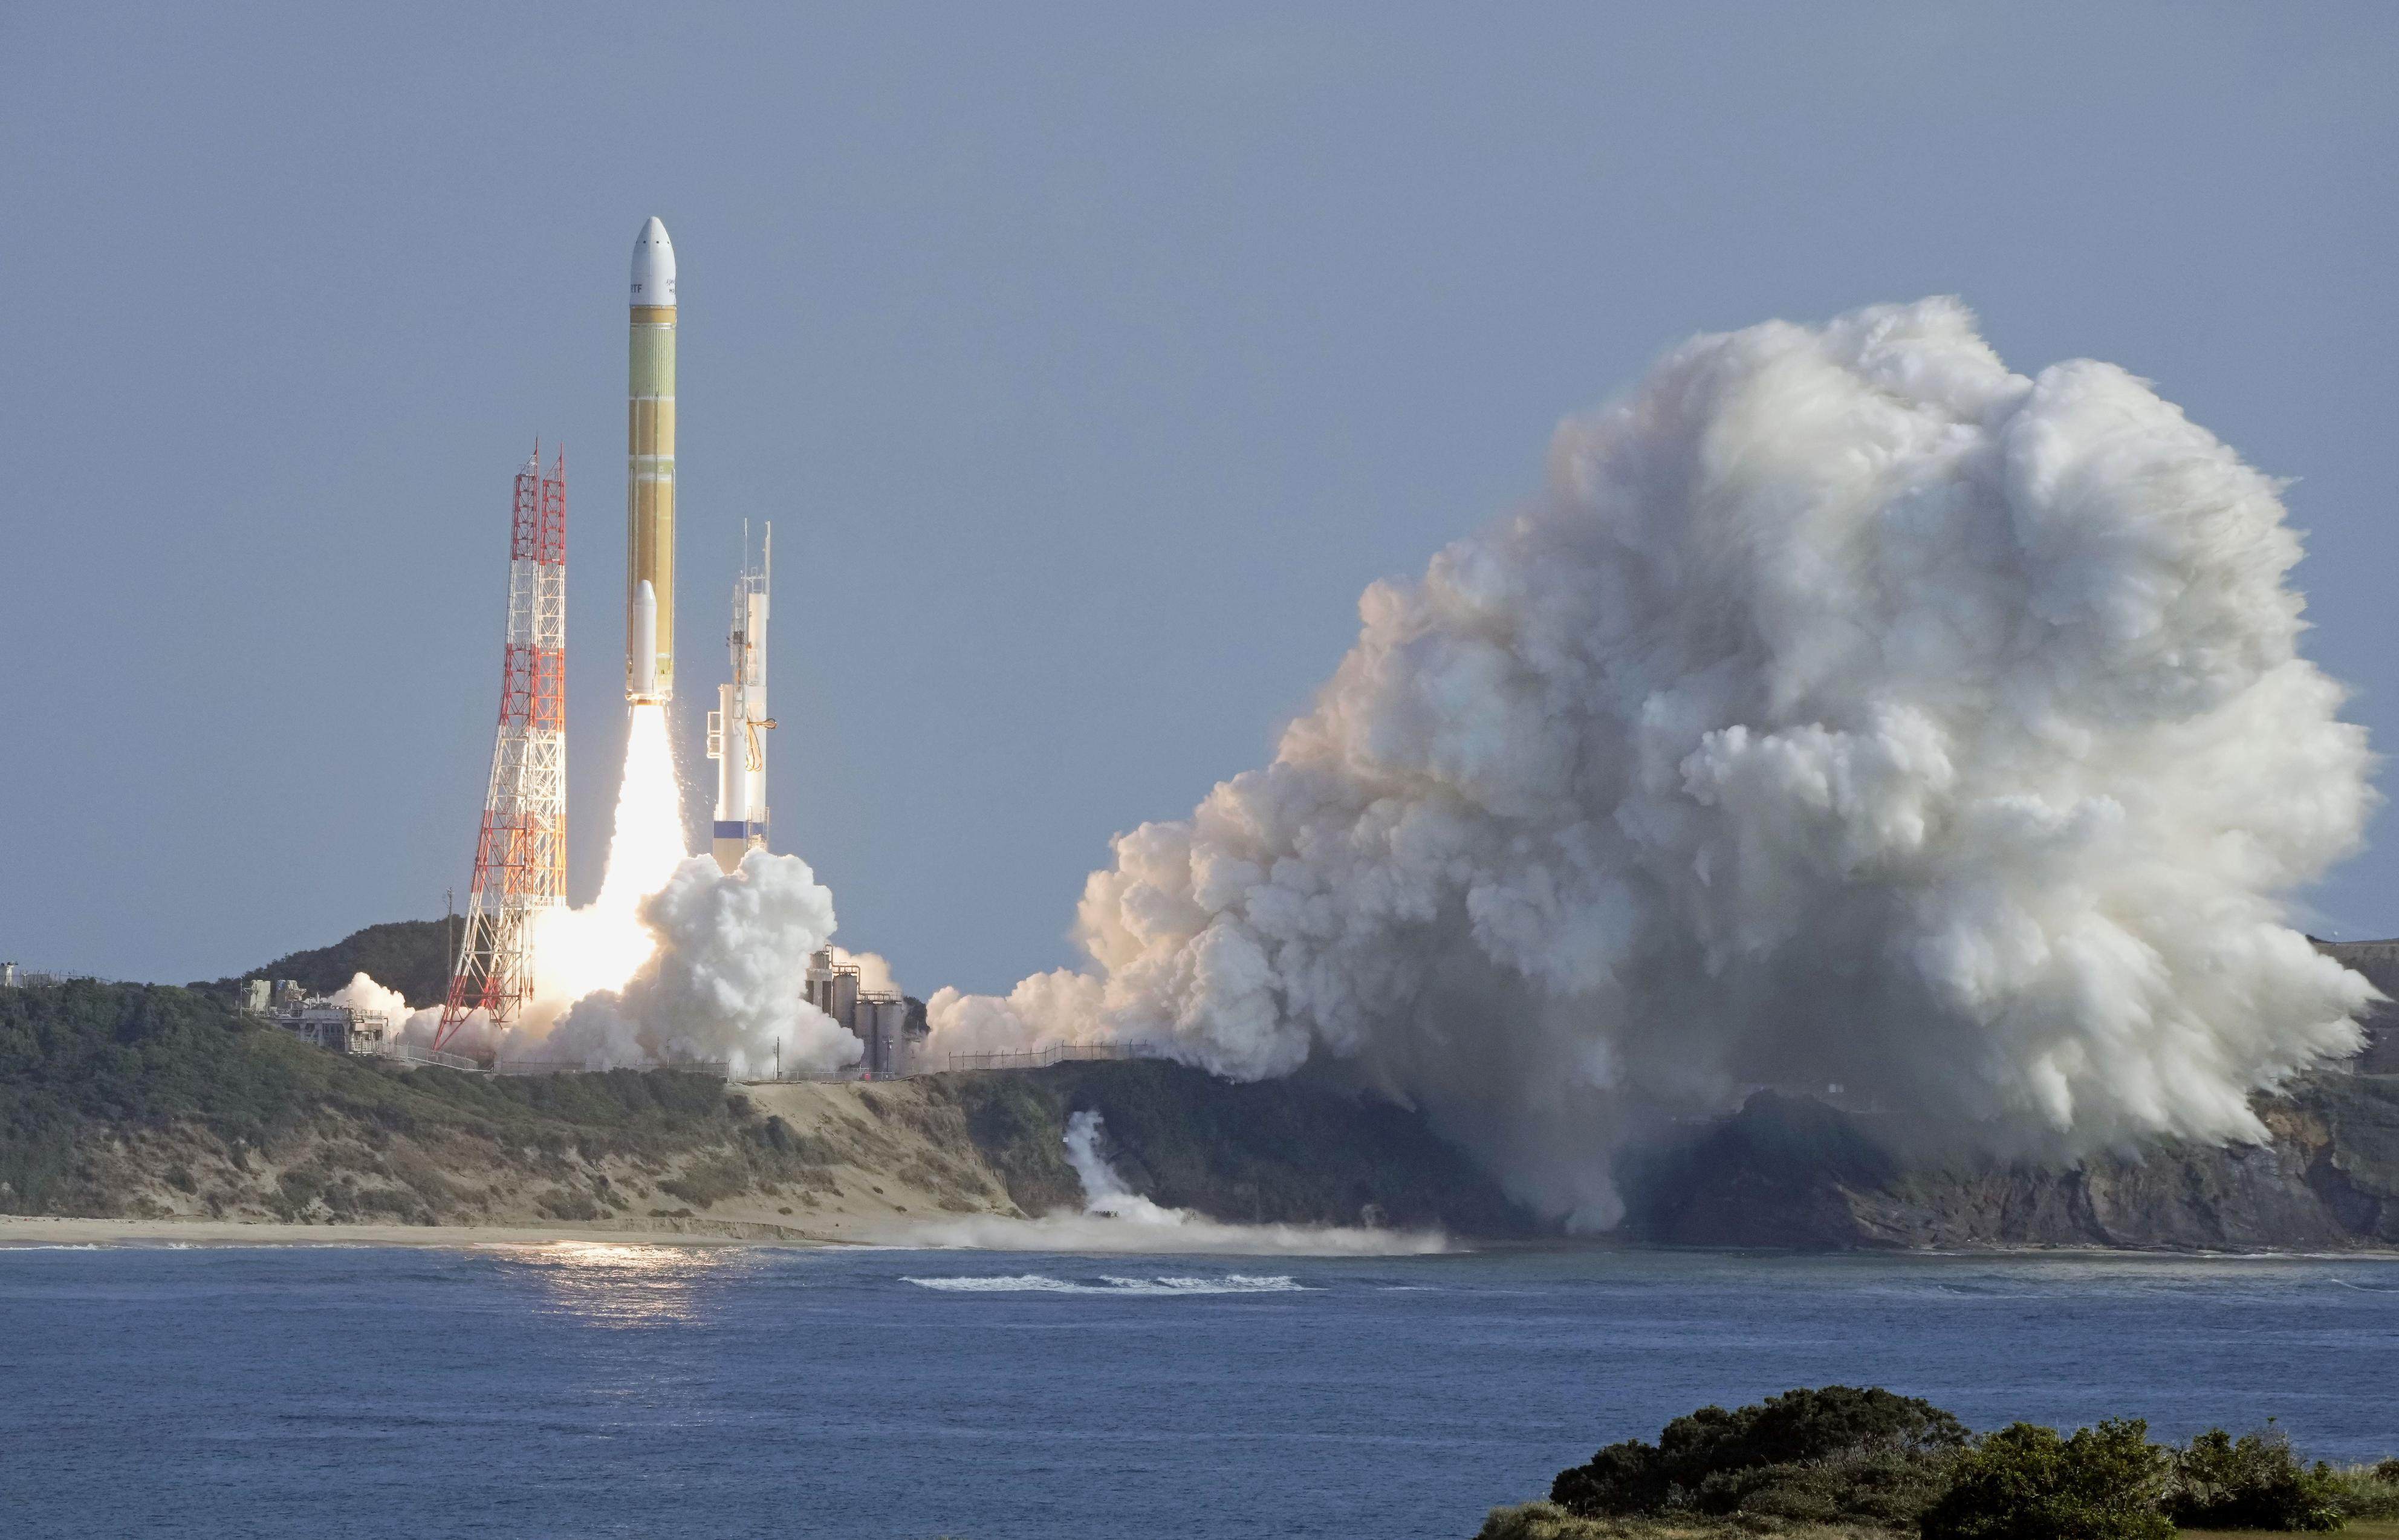 Japan’s H3 rocket carrying a dummy satellite and two functioning microsatellites lifts off from the Tanegashima Space Centre in Minamitane, Japan’s Kagoshima prefecture, on Saturday. Photo: Kyodo